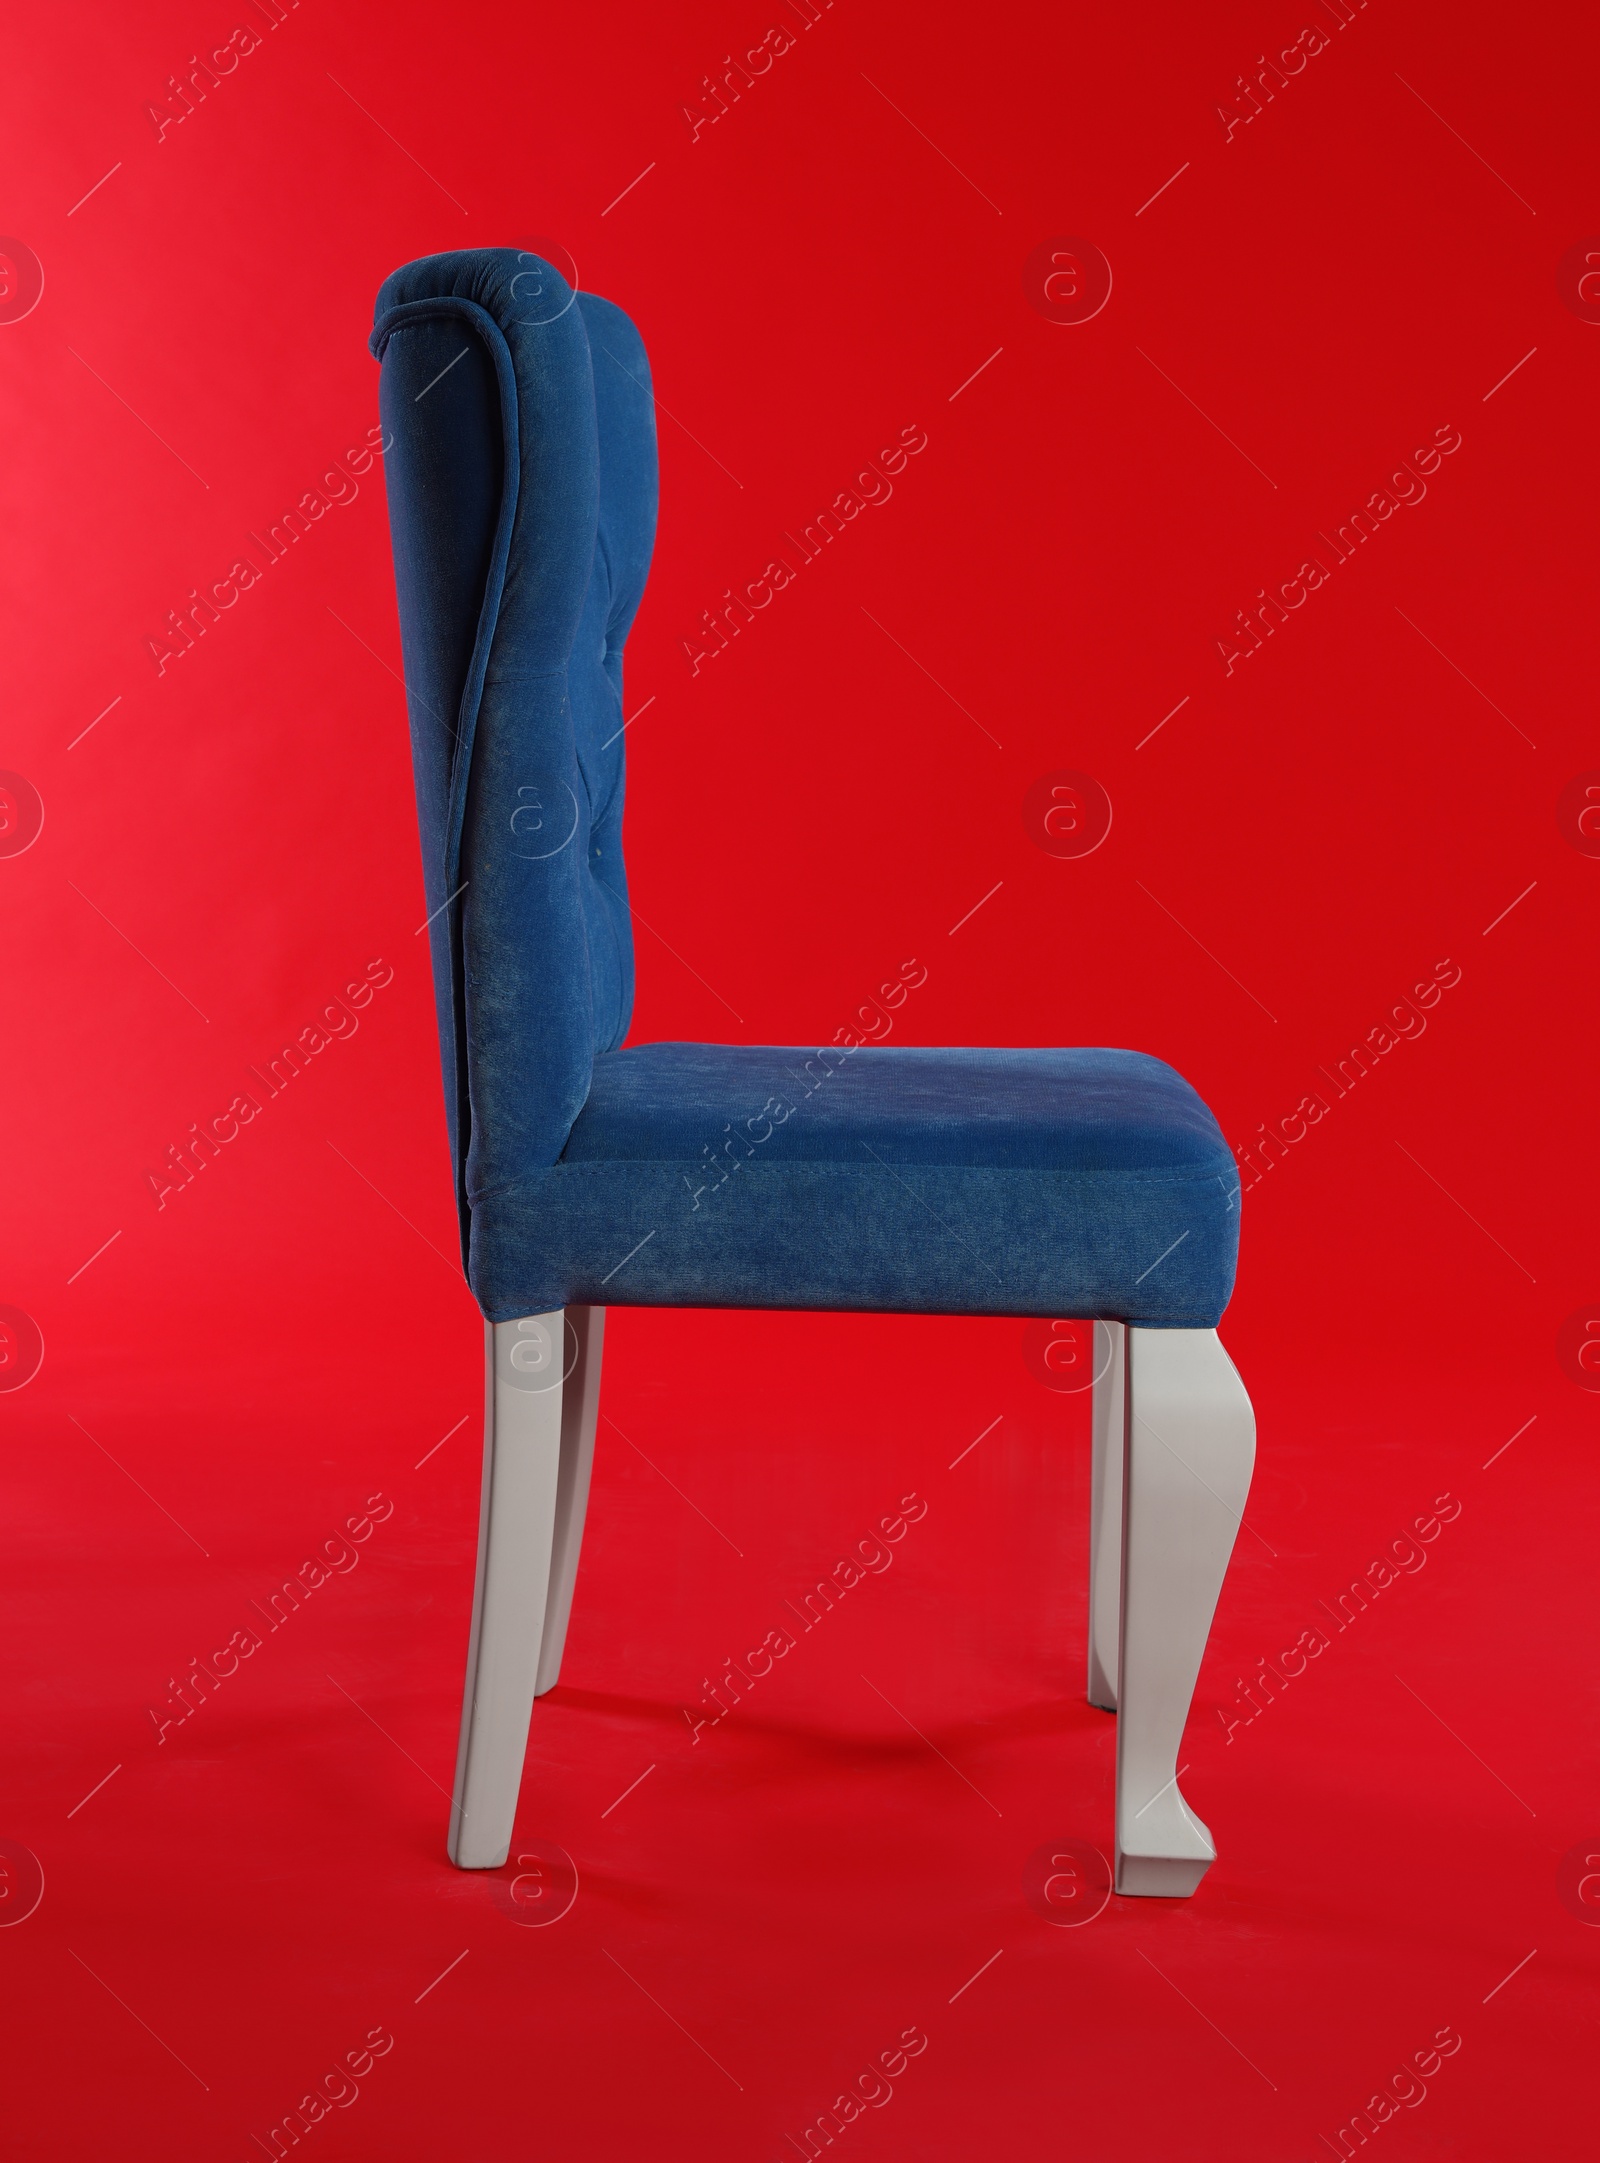 Photo of Stylish blue chair on red background. Element of interior design